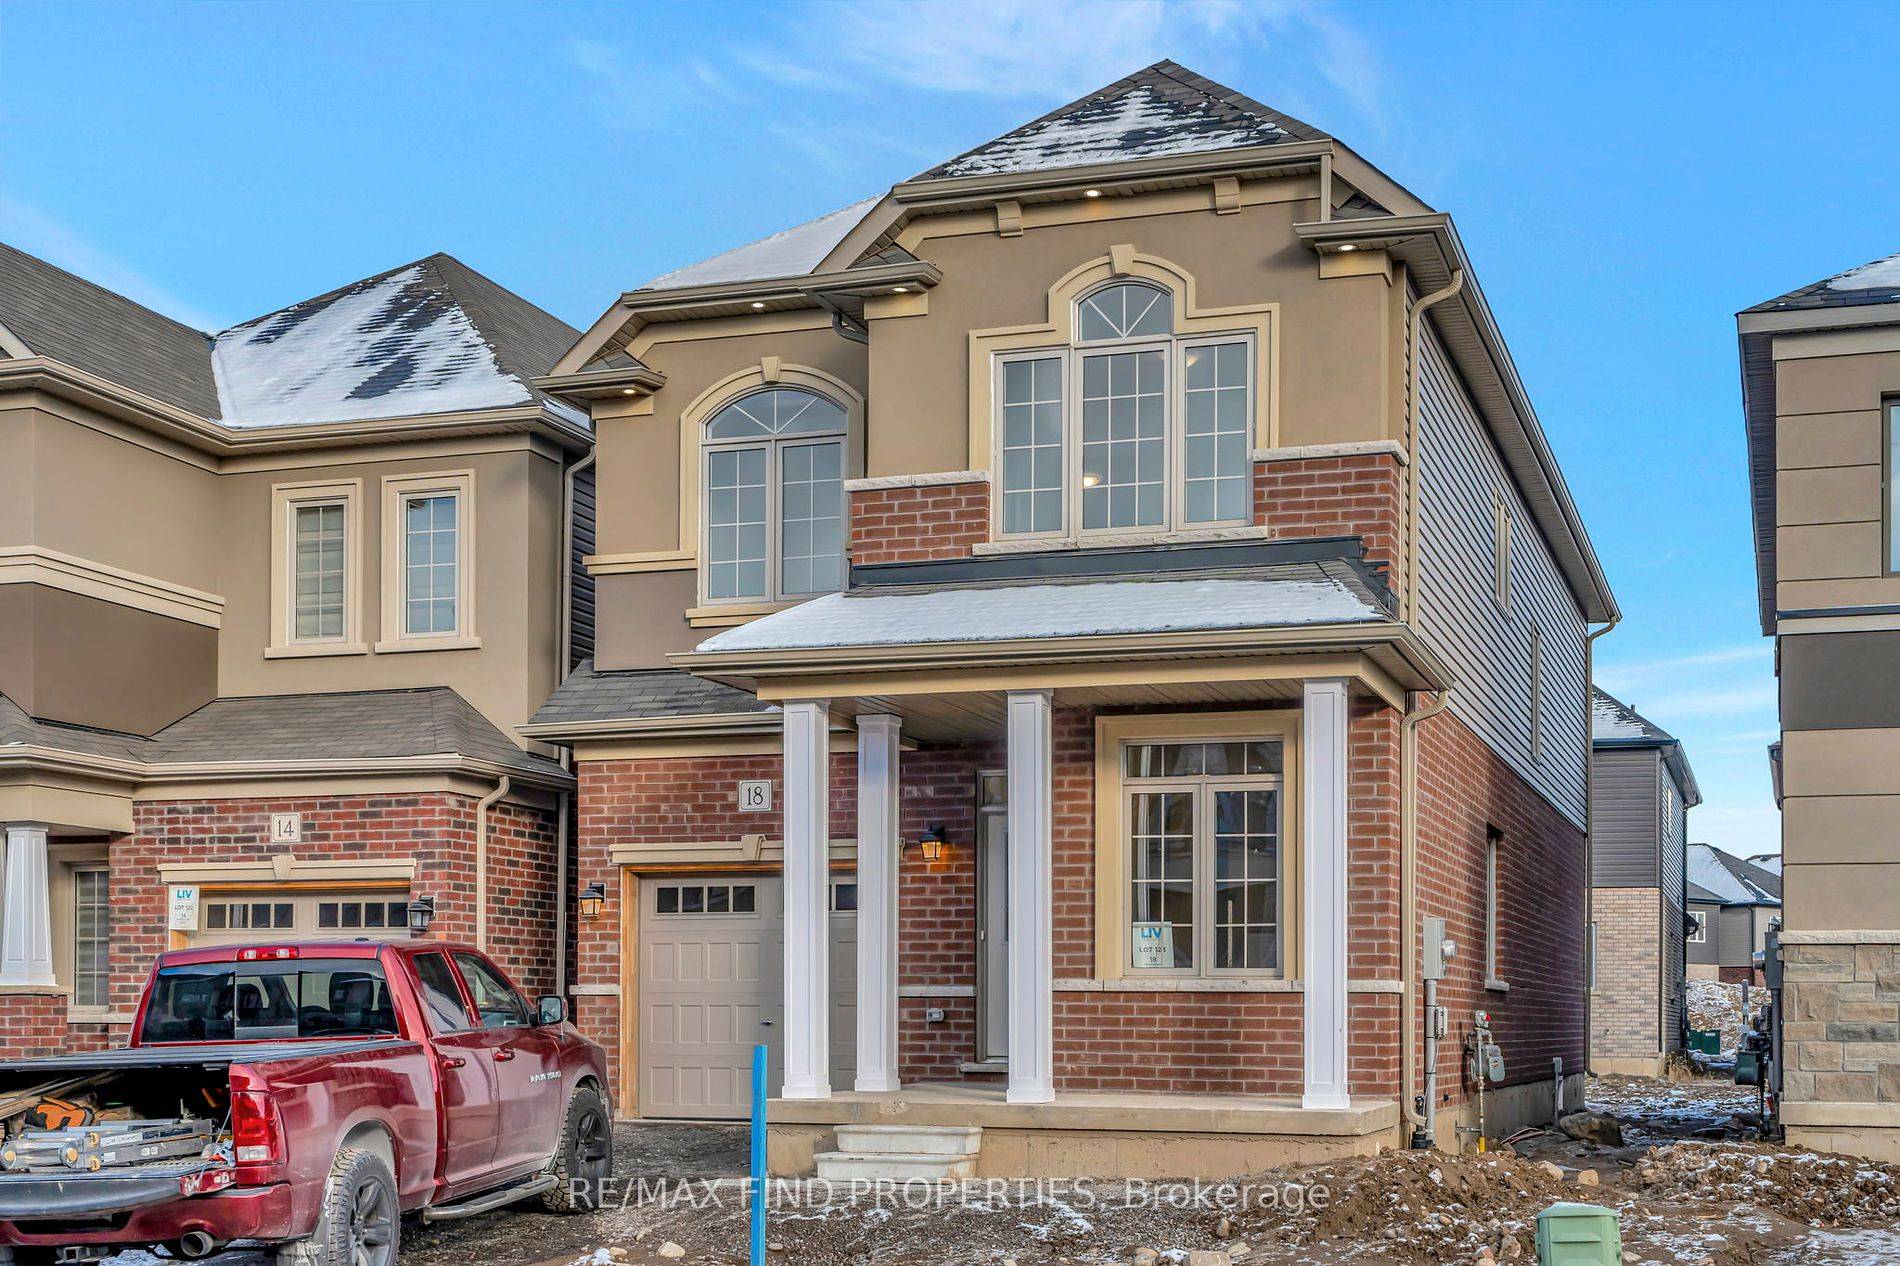 Brand new, 2208 sq ft detached home awaits your enjoyment in Brantford's picturesque neighborhood, nestled next to the Grand River !